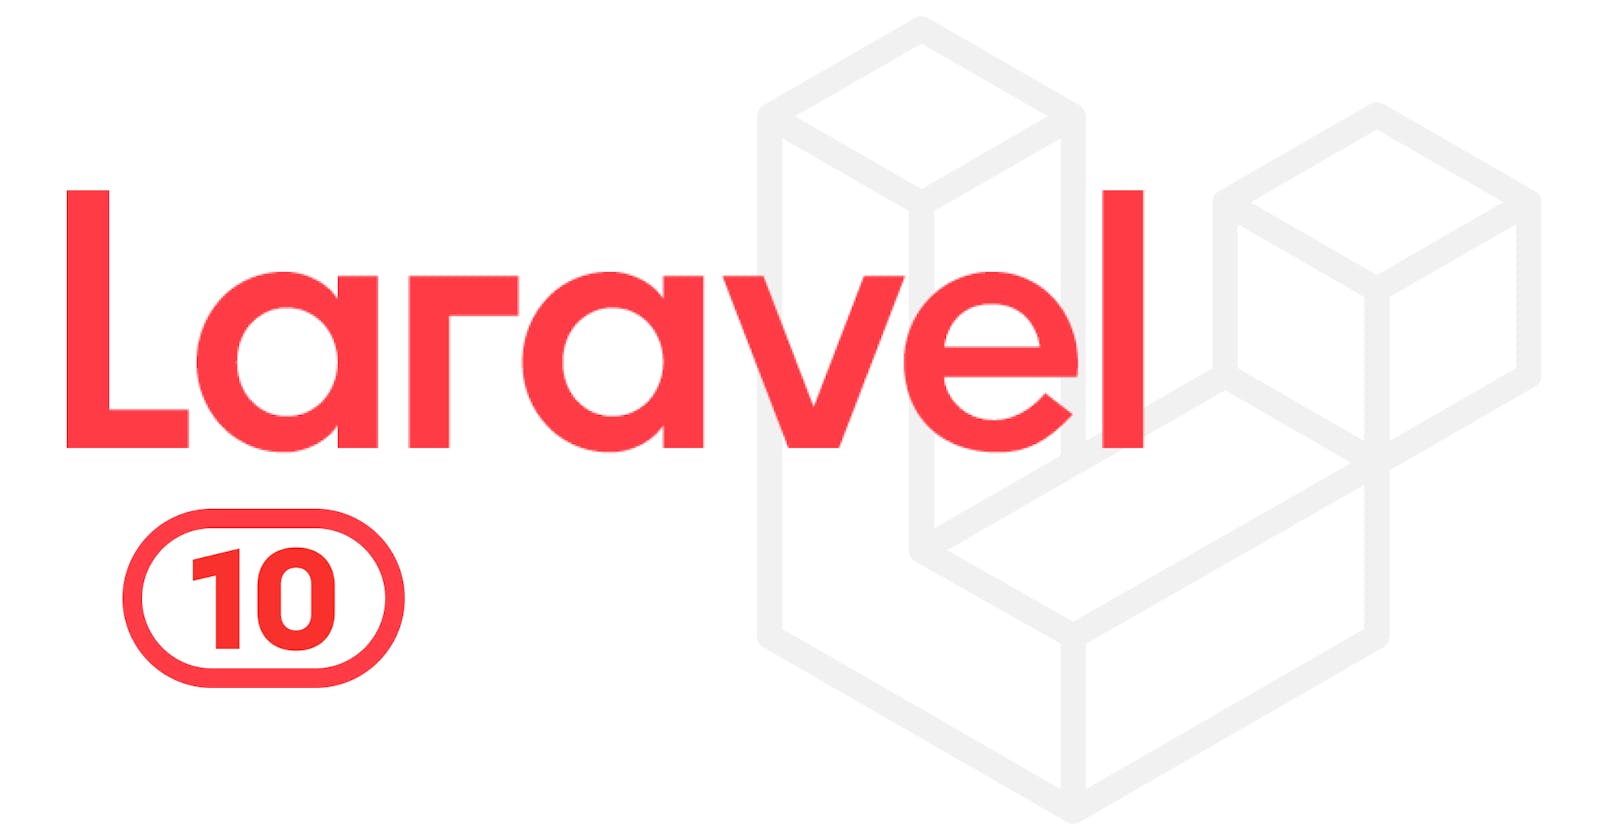 A Look at What's Coming to Laravel 10